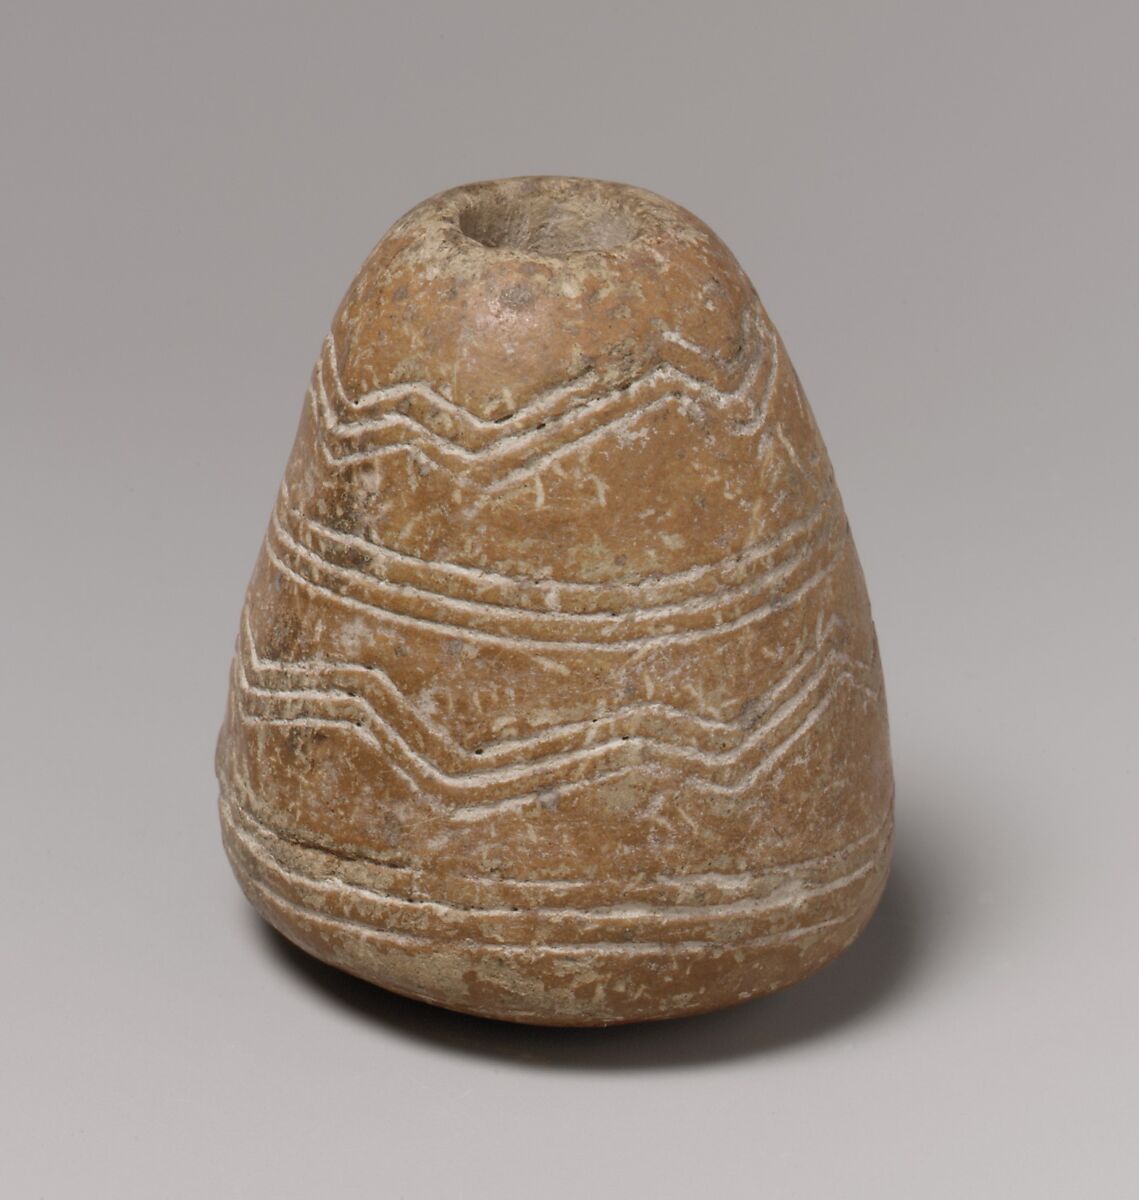 Terracotta spindle whorl, Terracotta, Cypriot 